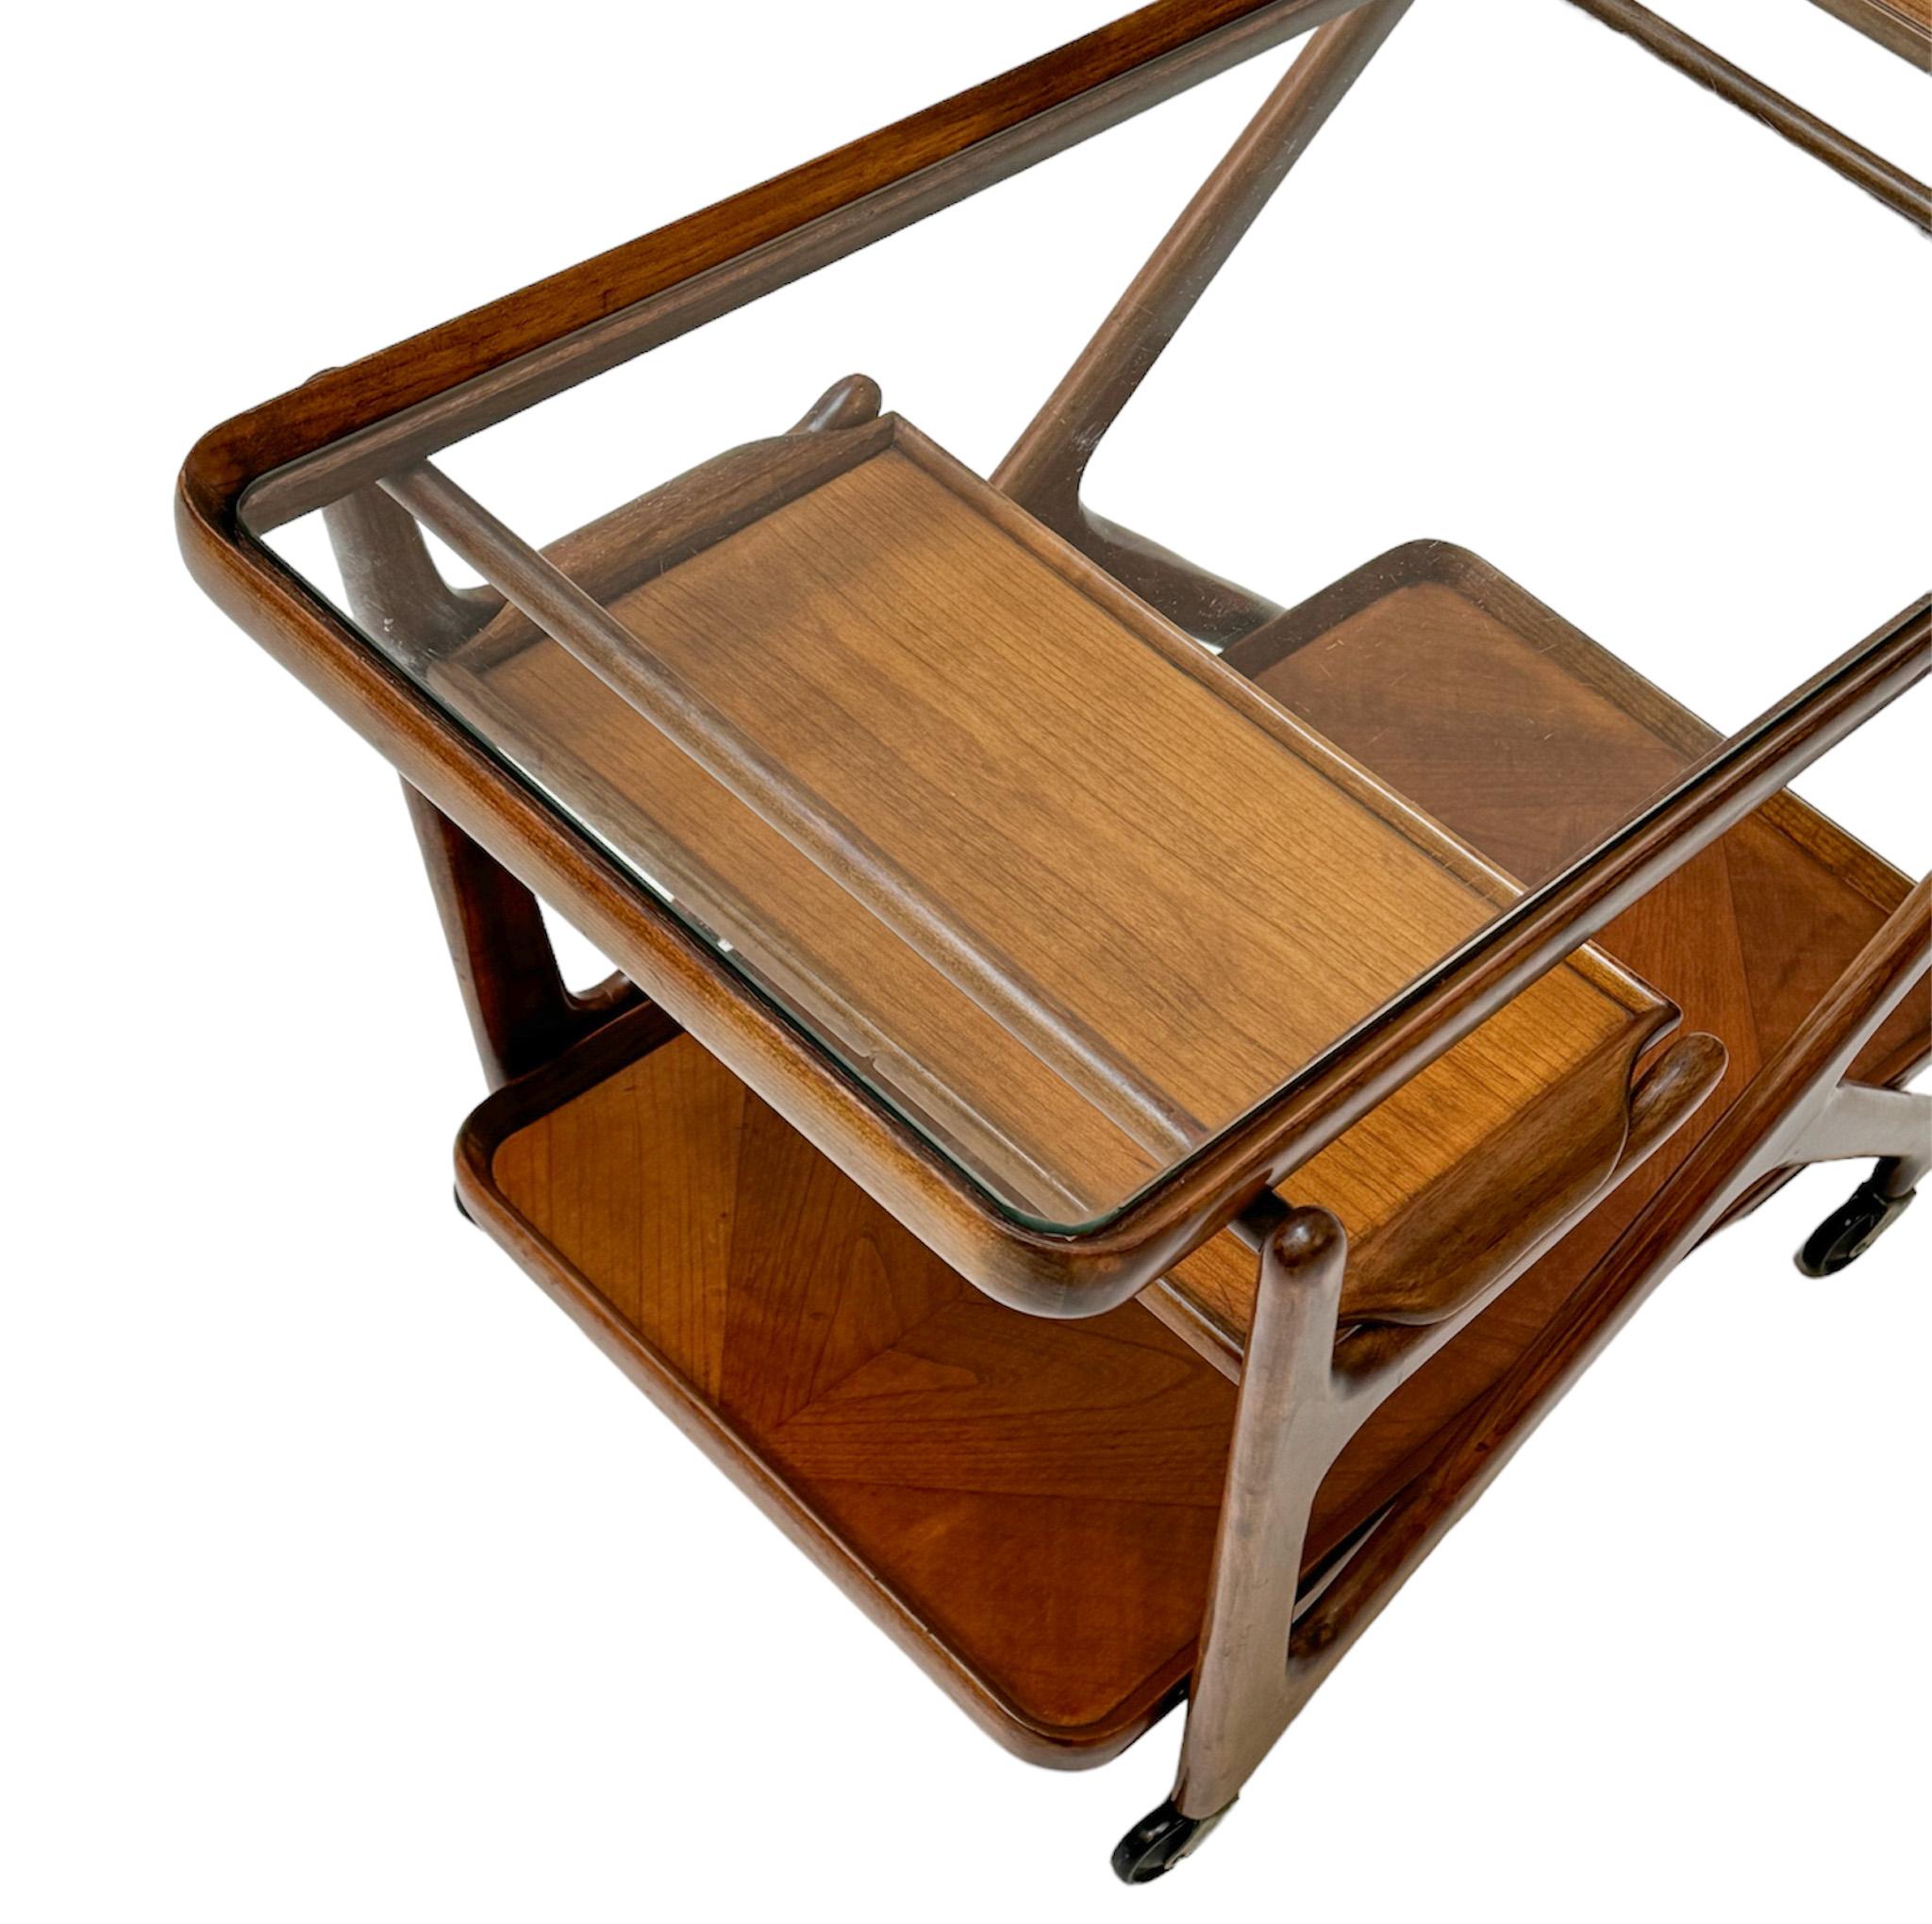 Walnut Mid-Century Modern Trolley or Bar Cart by Cesare Lacca for Cassina, 1950s For Sale 4